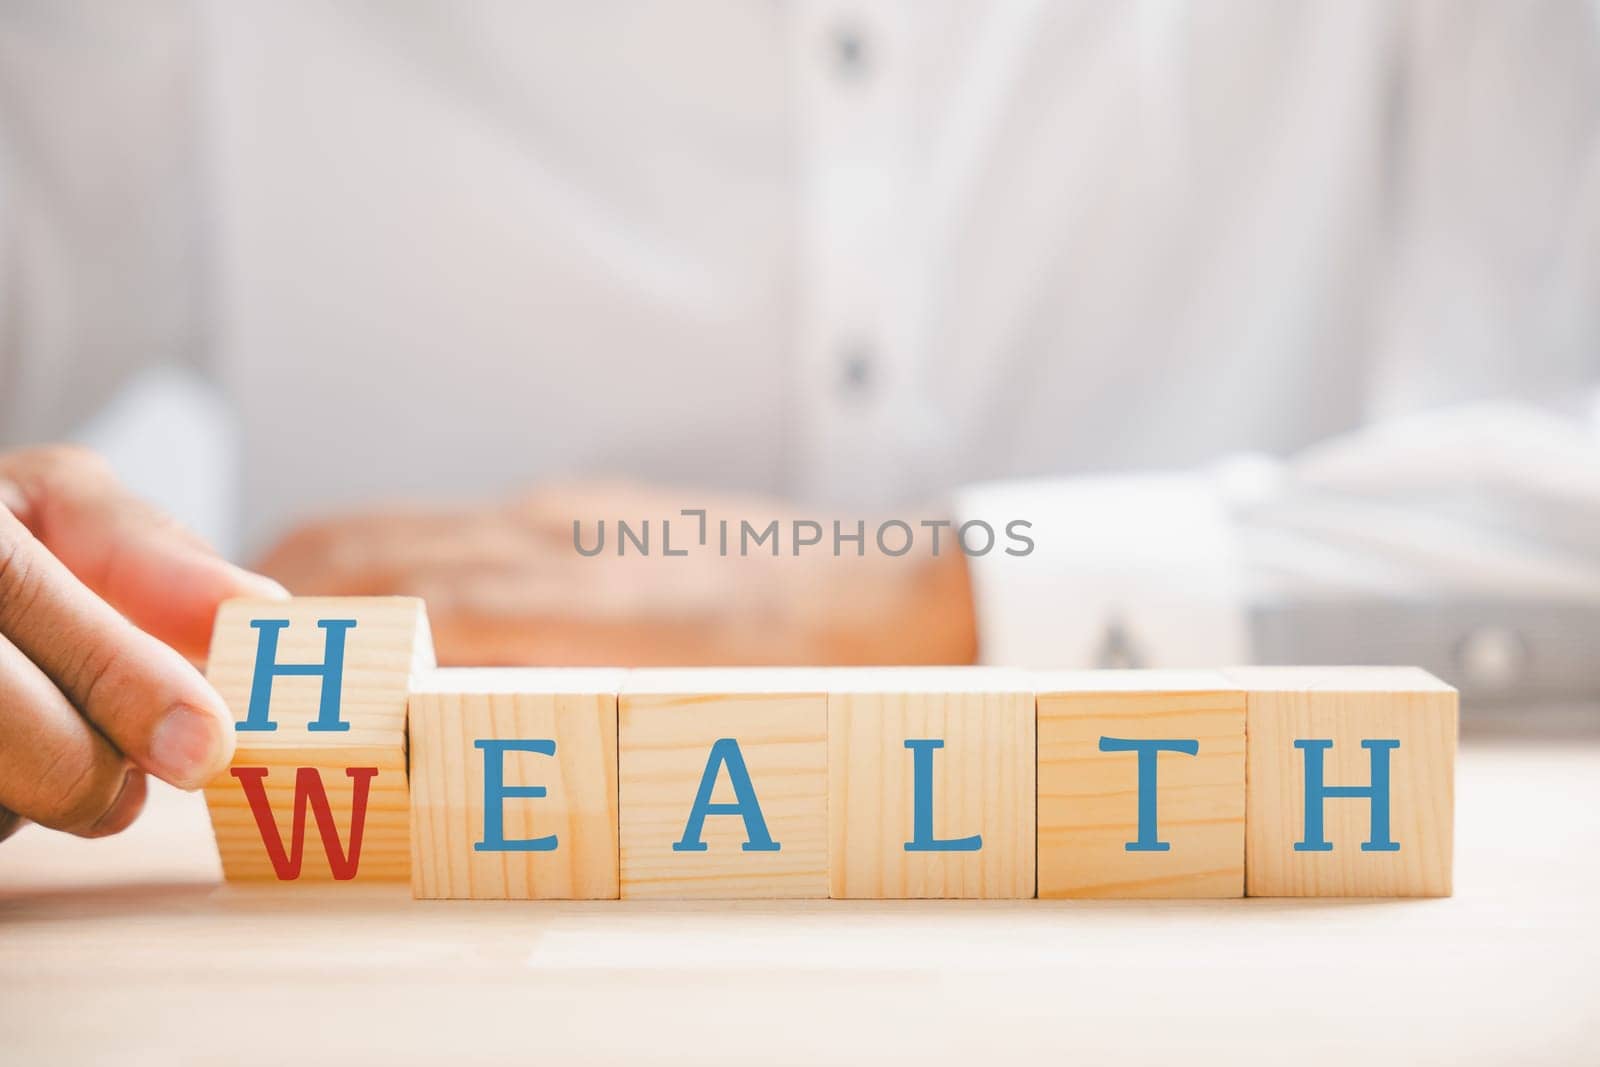 Wealth transforms Cube flip signifies health. Life insurance and healthcare investment concept. Money to well-being strategy.